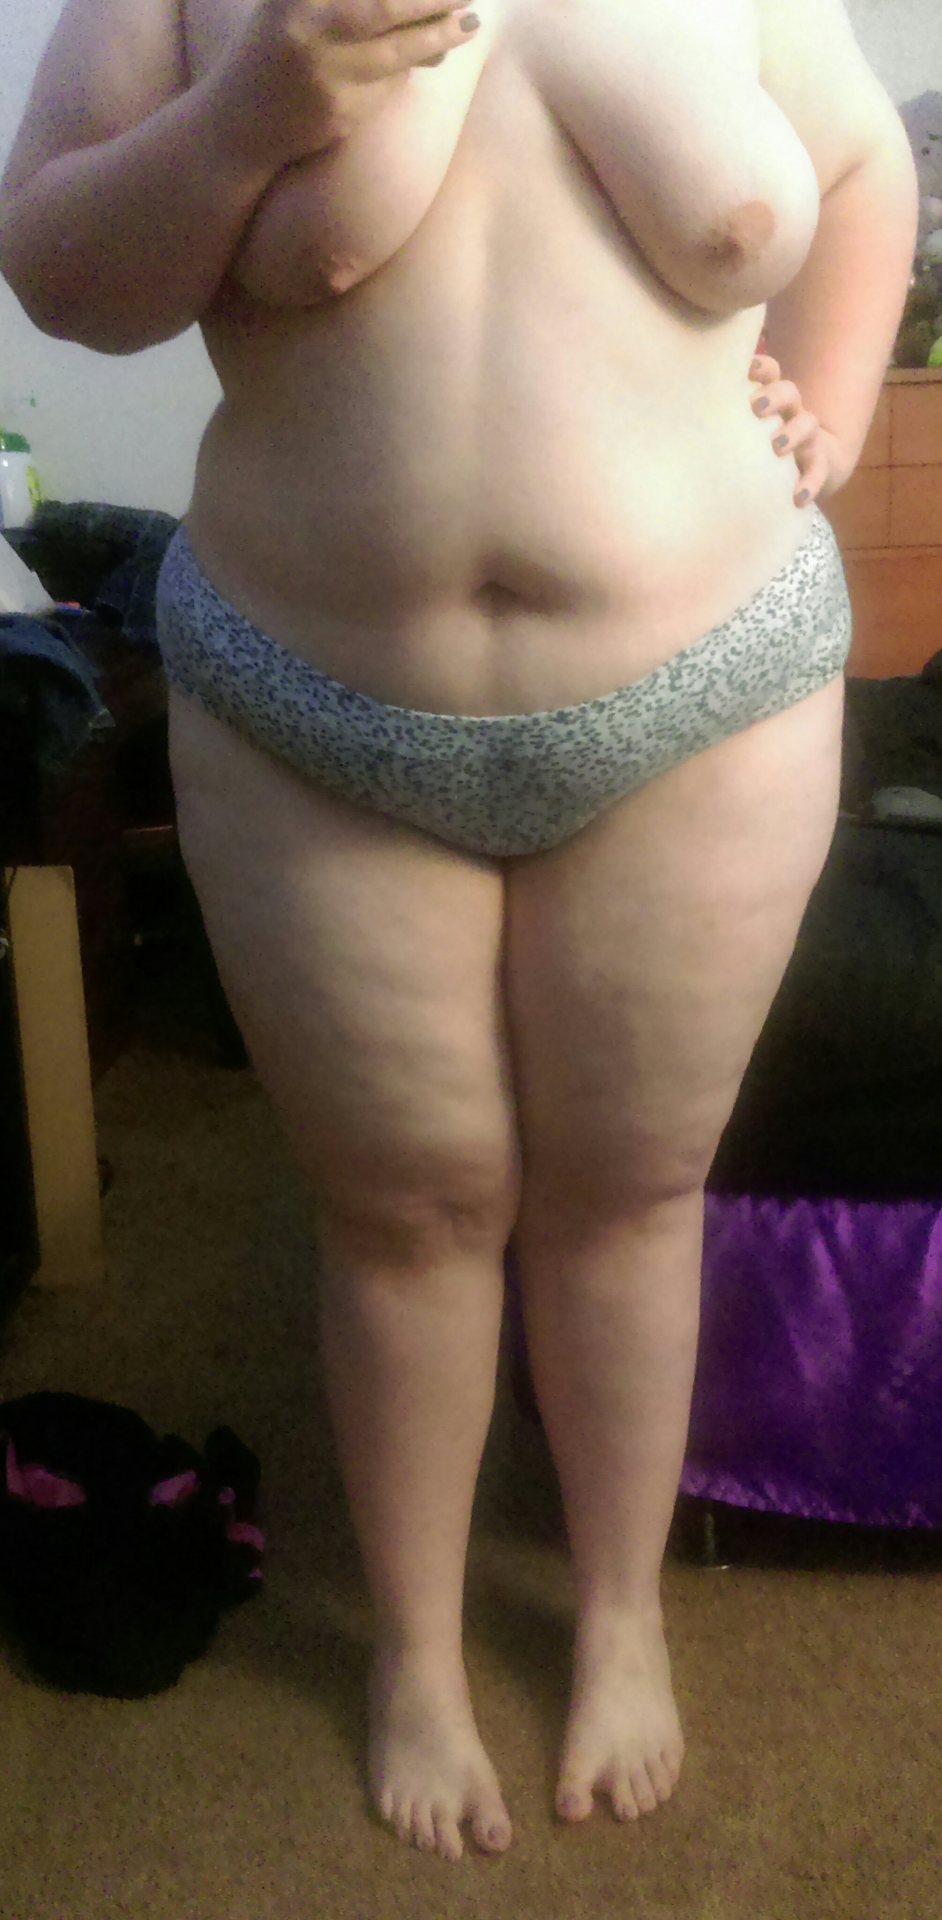 chubby-bunnies:  Nothing particularly cute or flattering, just my body doin’ it’s